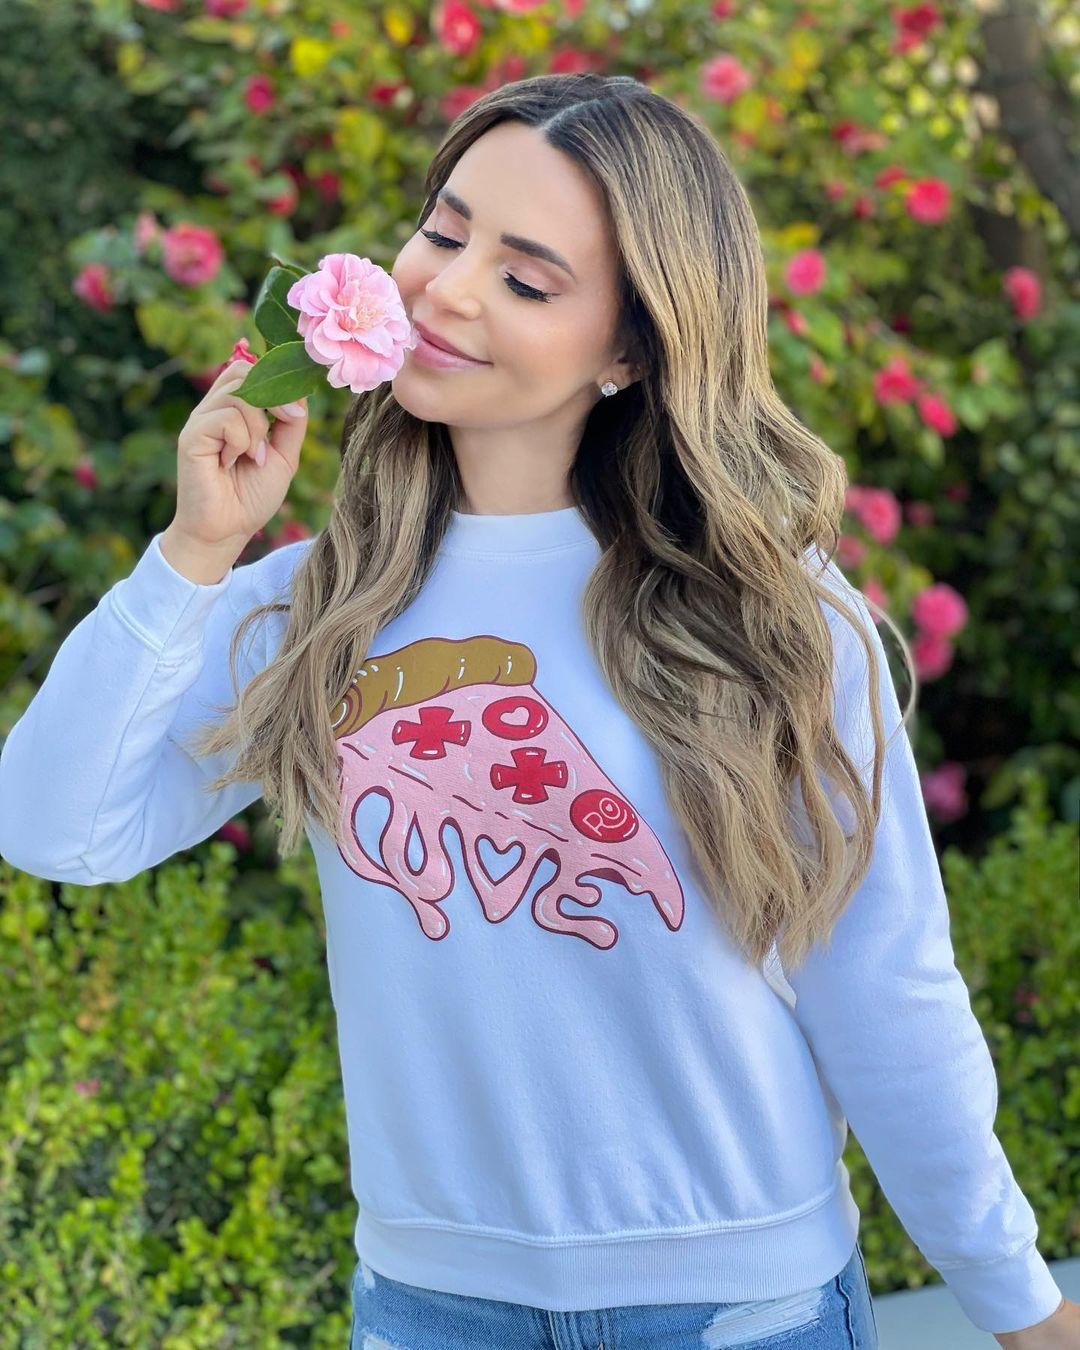 I love every pizza you! 🍕💕

New Merch! Check out this lovely pizza crewneck at RosannaPansino.com